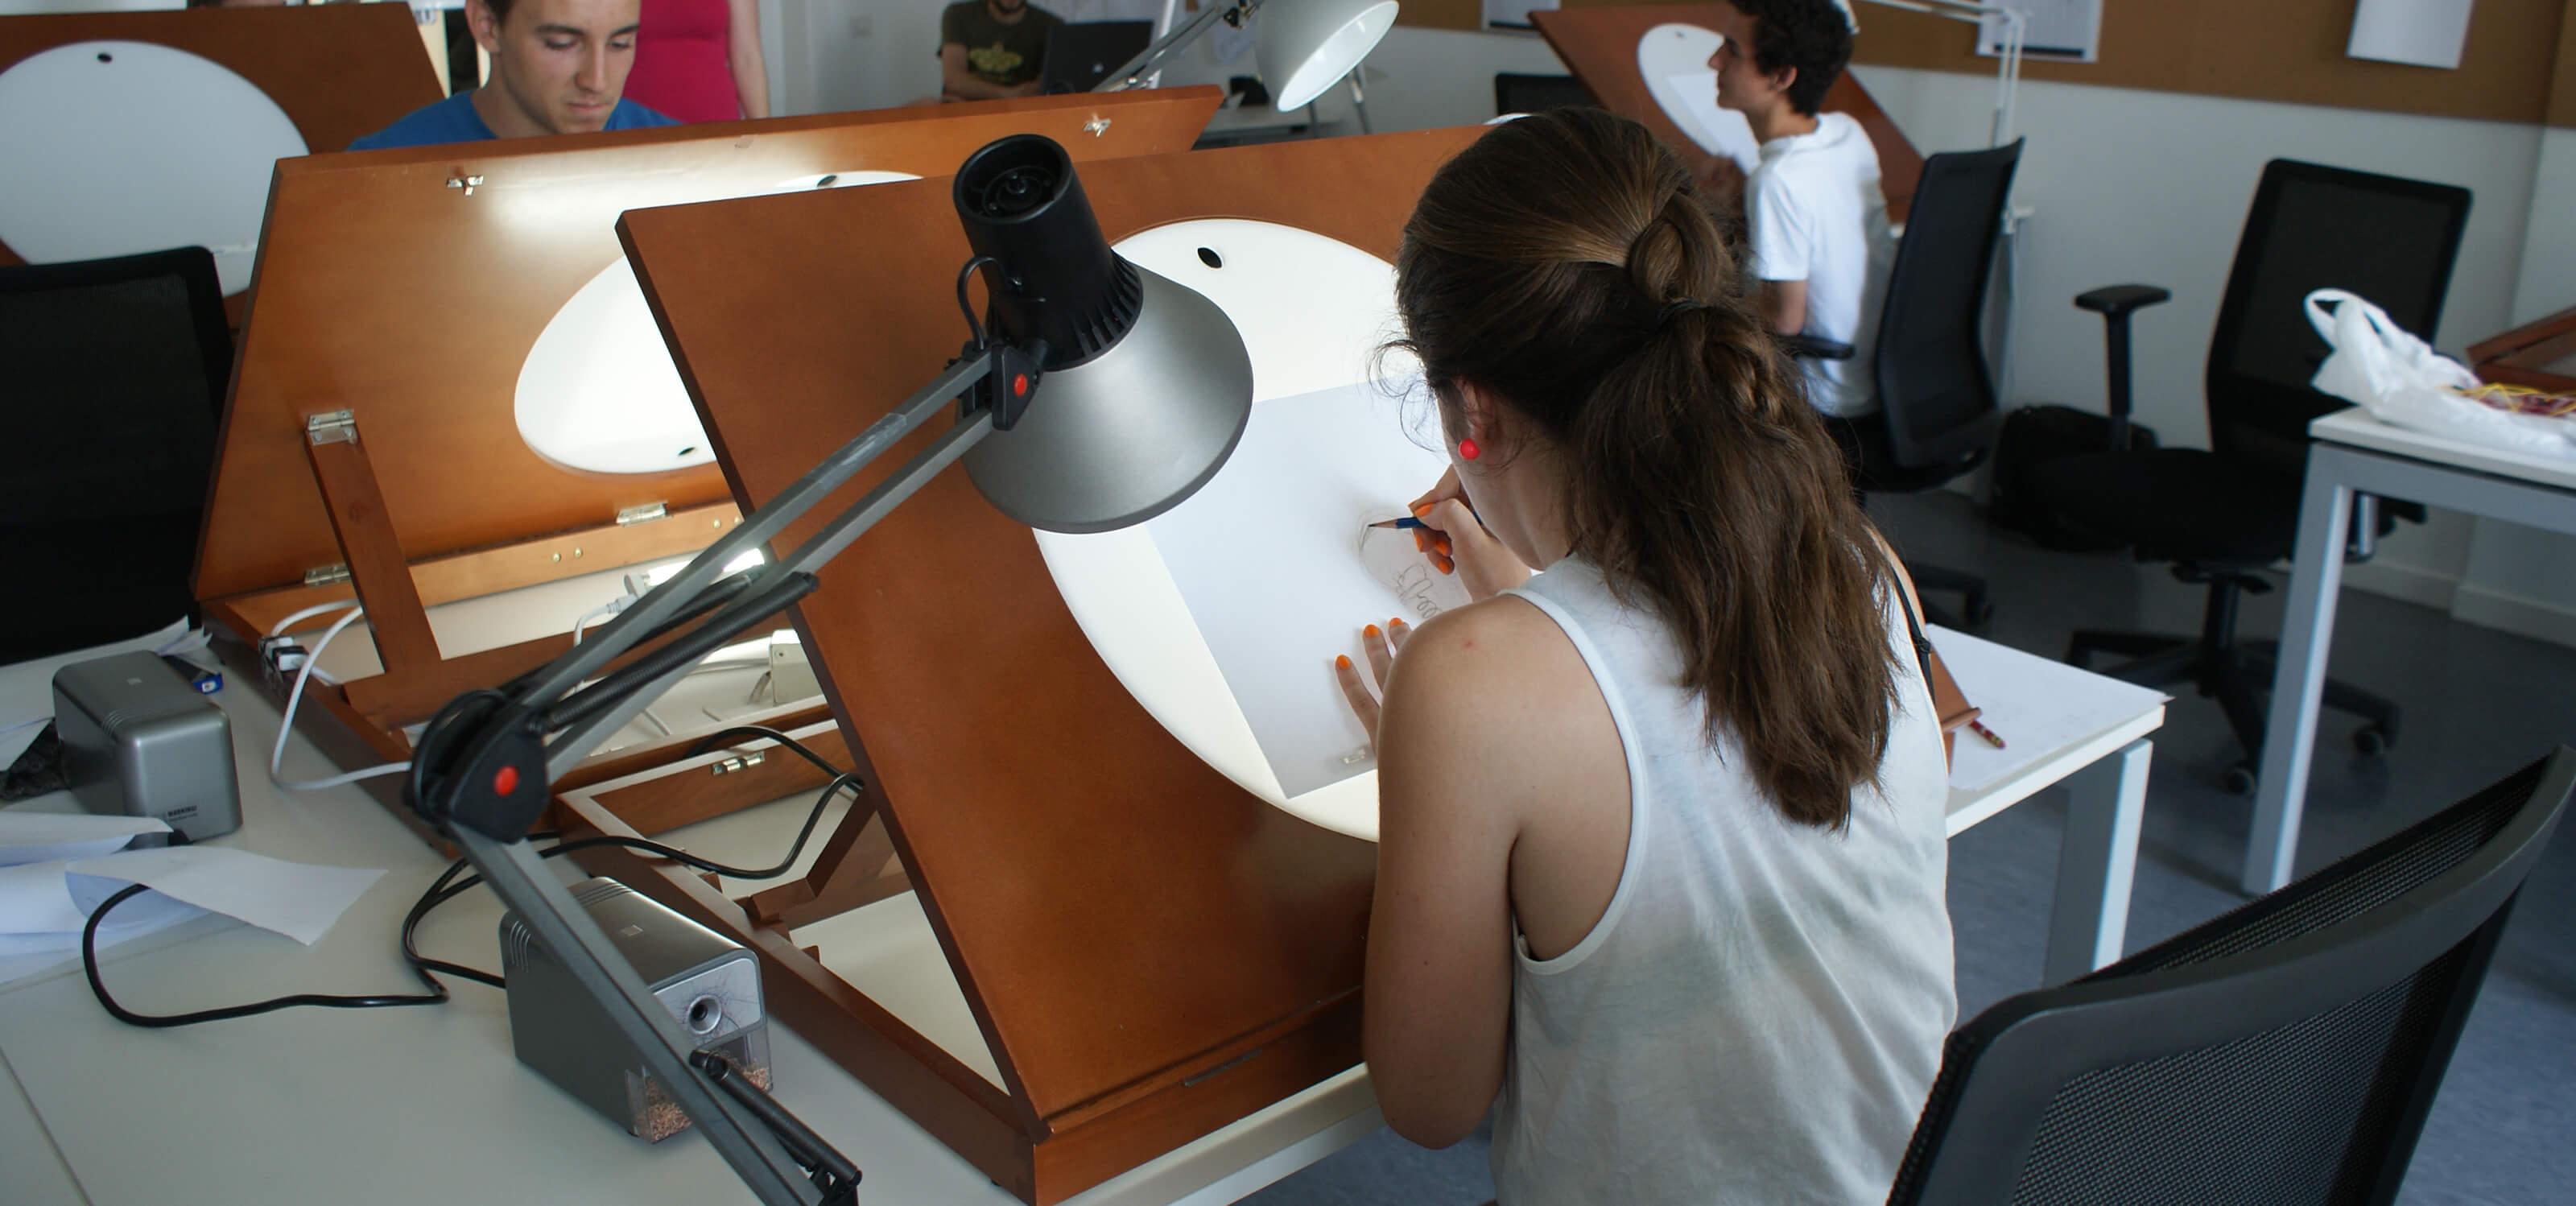 A DigiPen Europe-Bilbao student drawing on an animation light box